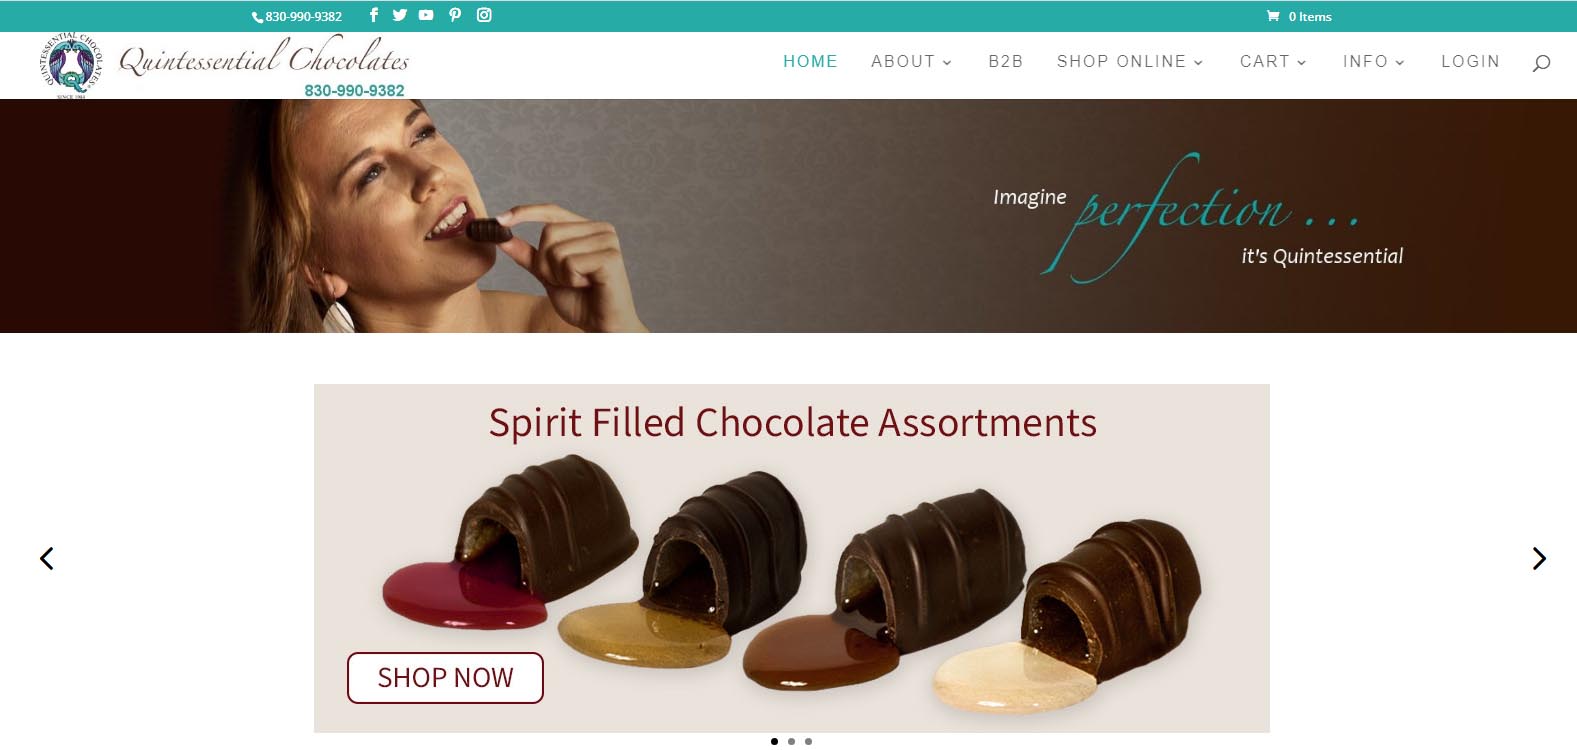 Quintessential Chocolates Home Page